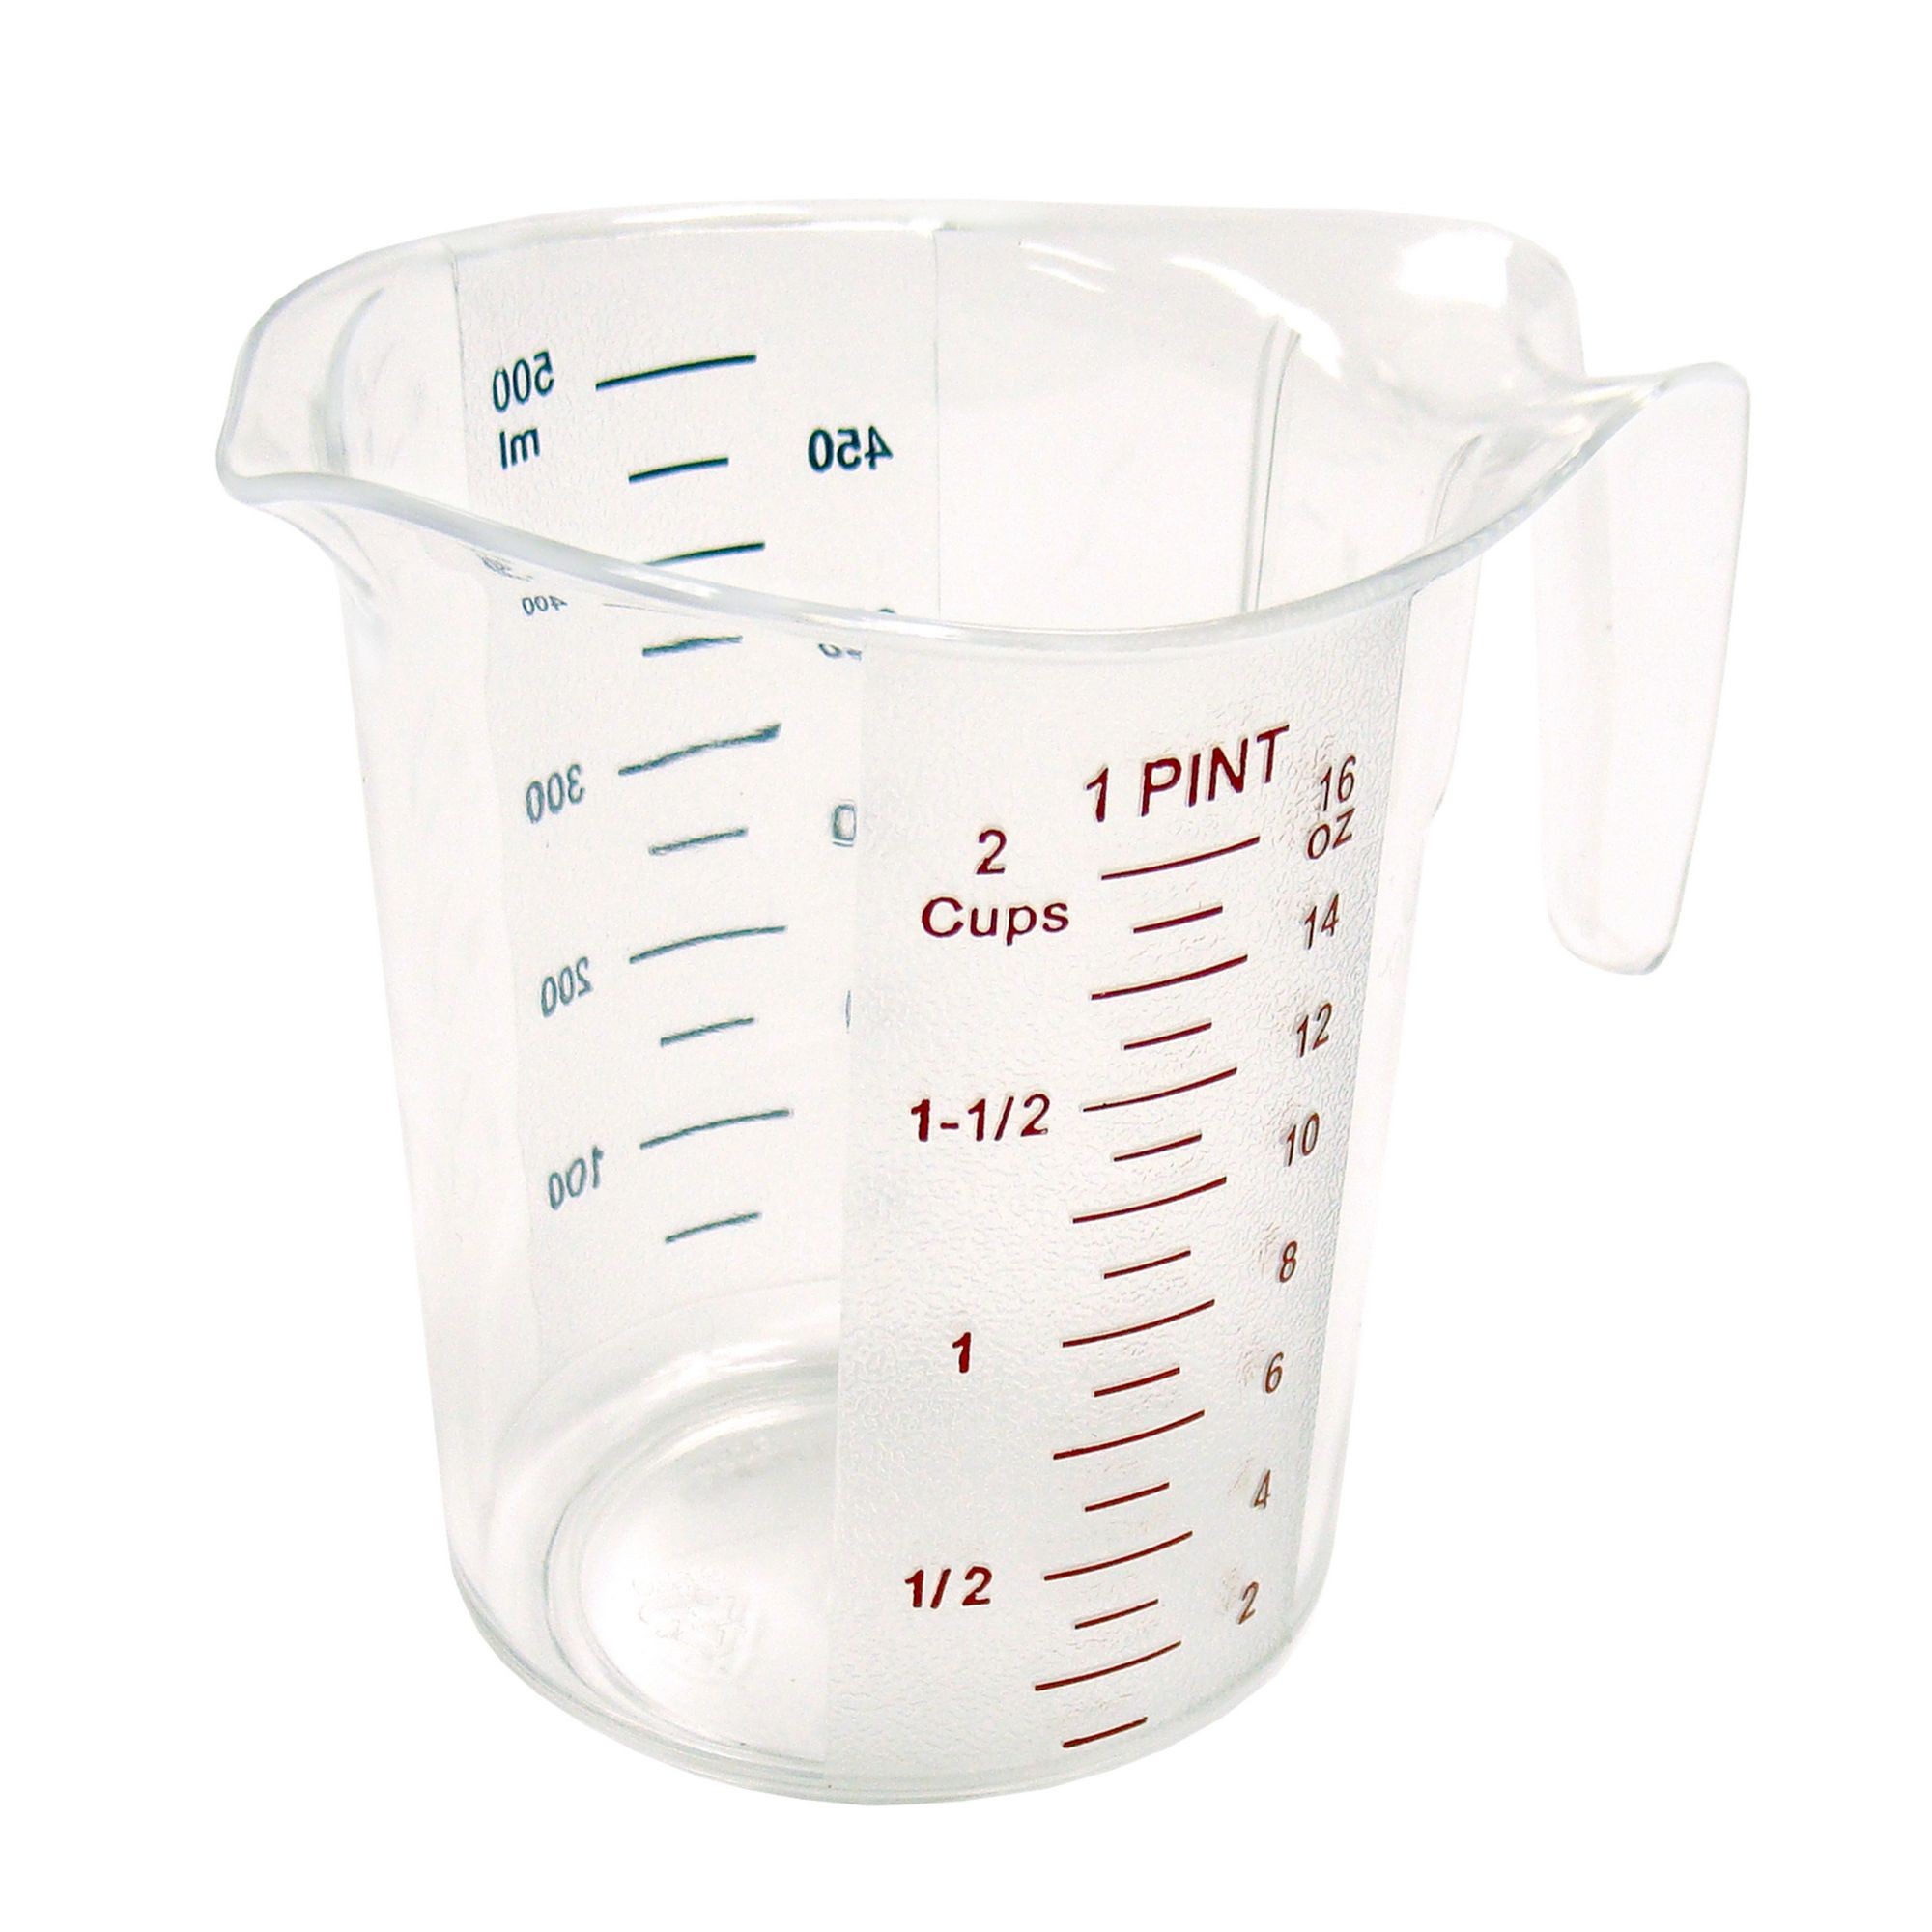 Tablecraft 724B 1/3 Cup Stainless Steel Measuring Cup